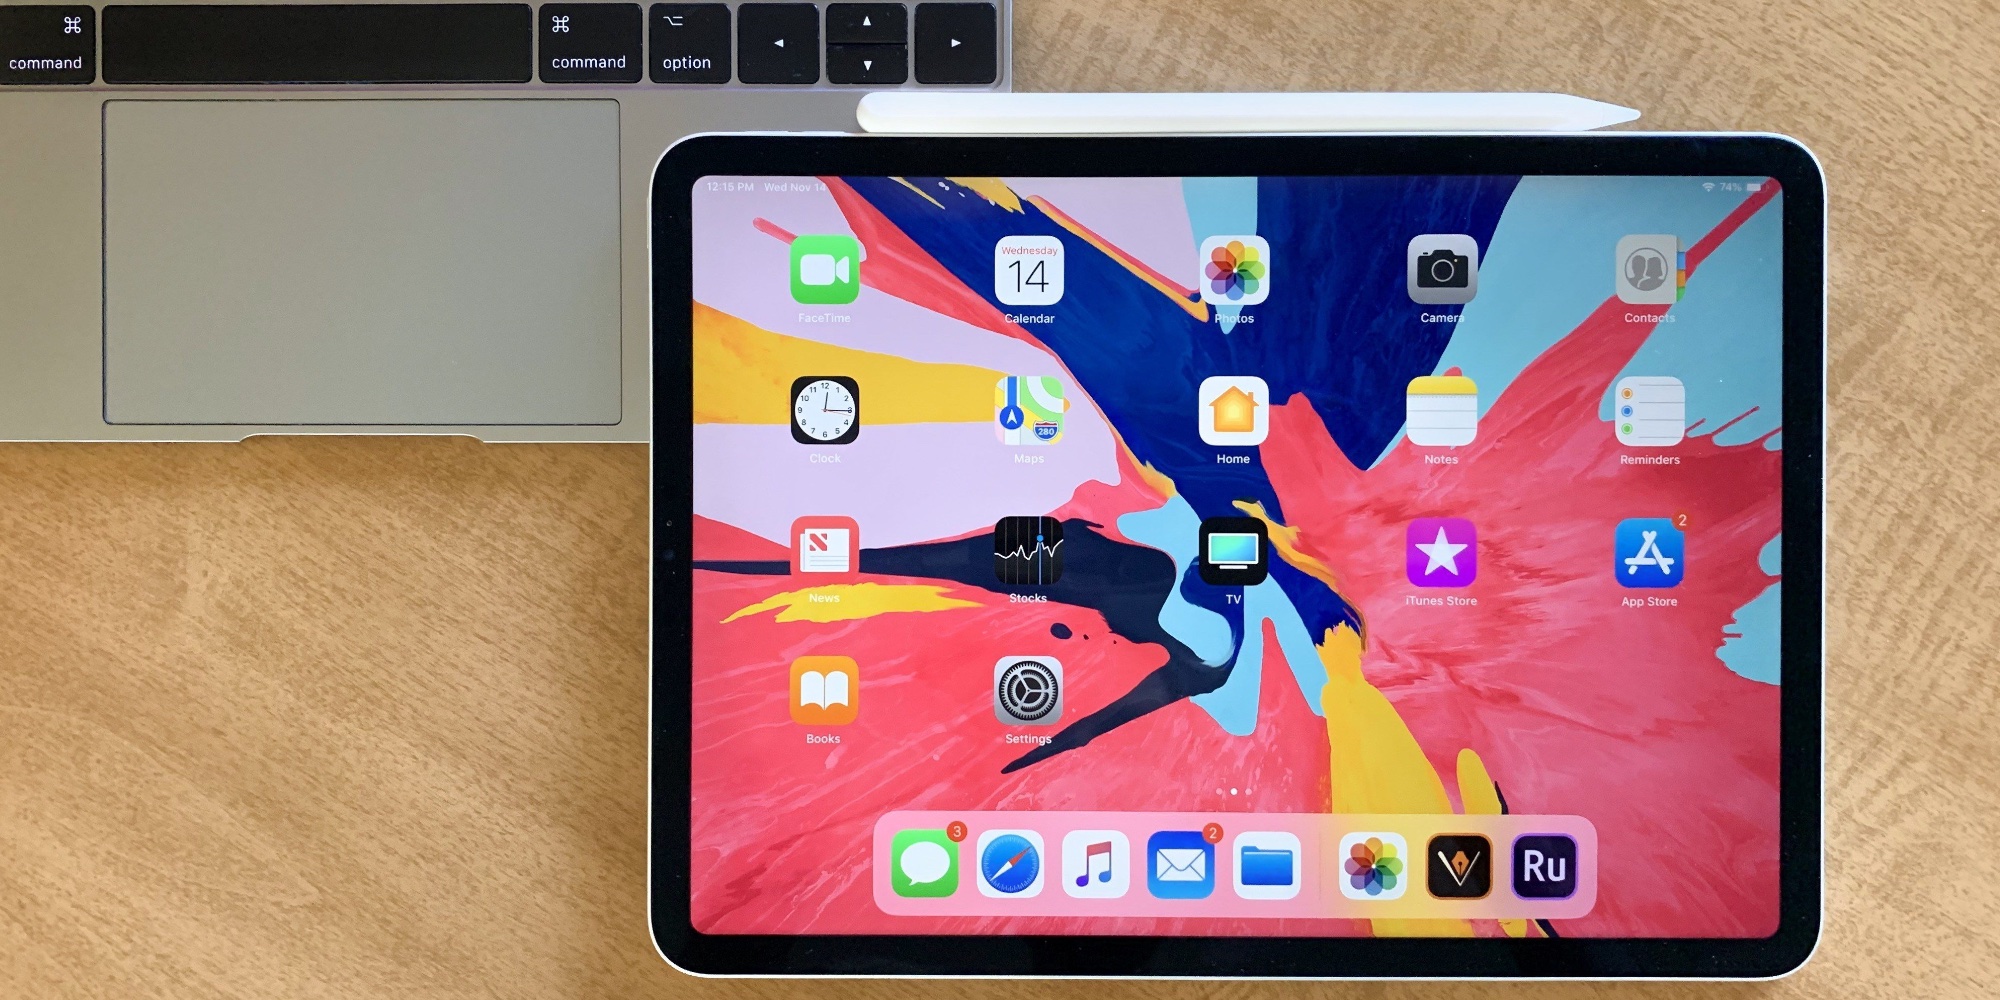 Amazon clears out 2018 iPad Pro inventory with up to $350 off original prices thumbnail